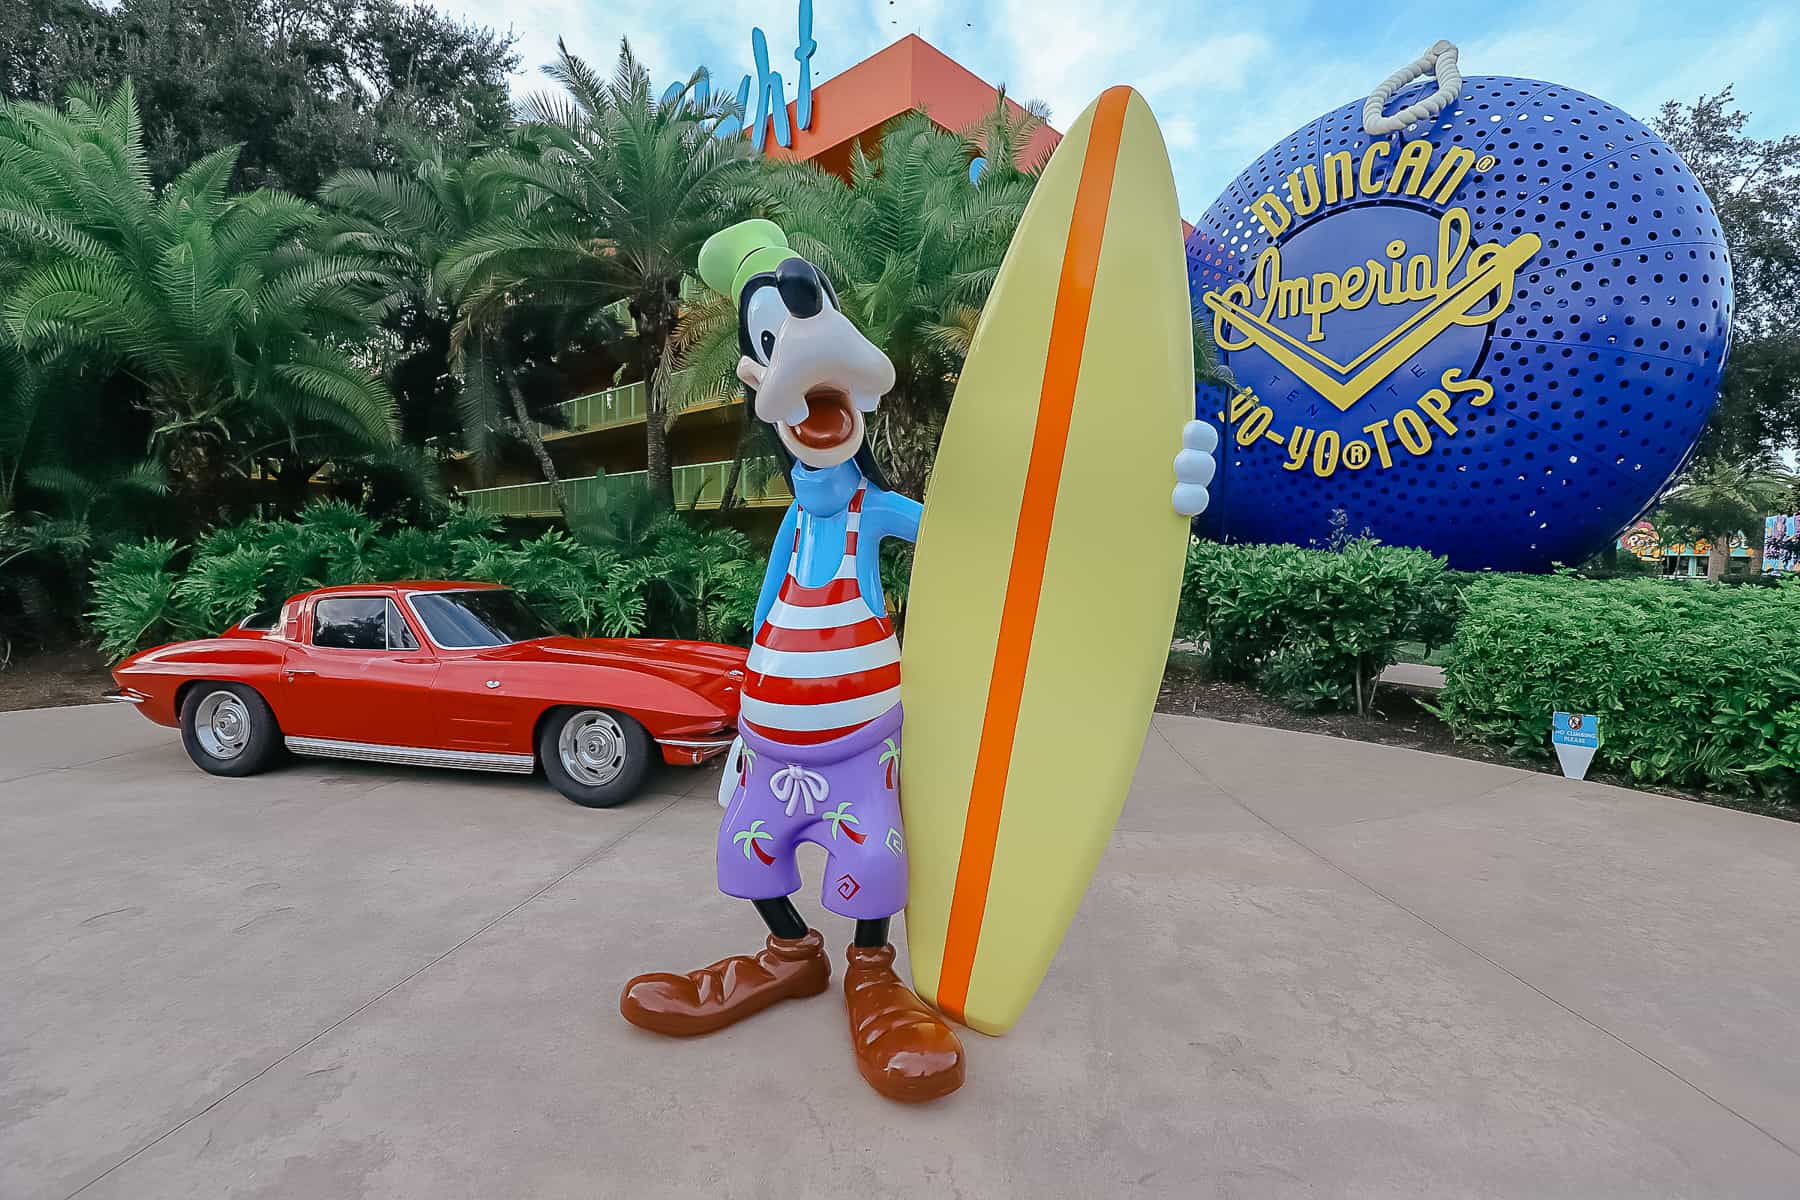 Goofy with a surfboard and corvette in a fun photo opp area at Pop Century. 